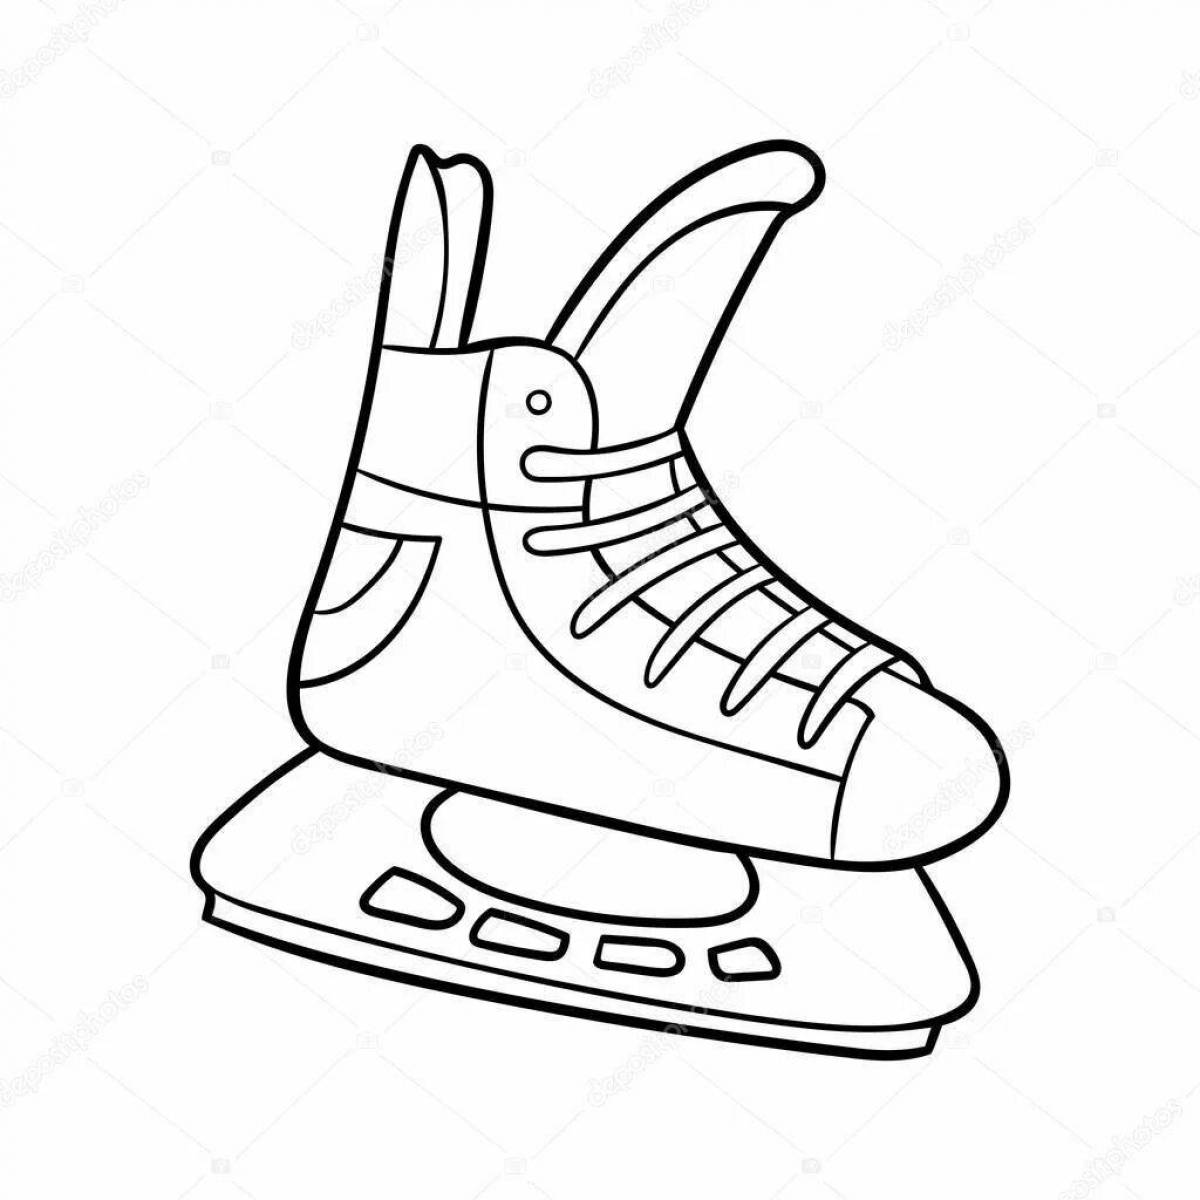 Shiny skates coloring book for 5-6 year olds